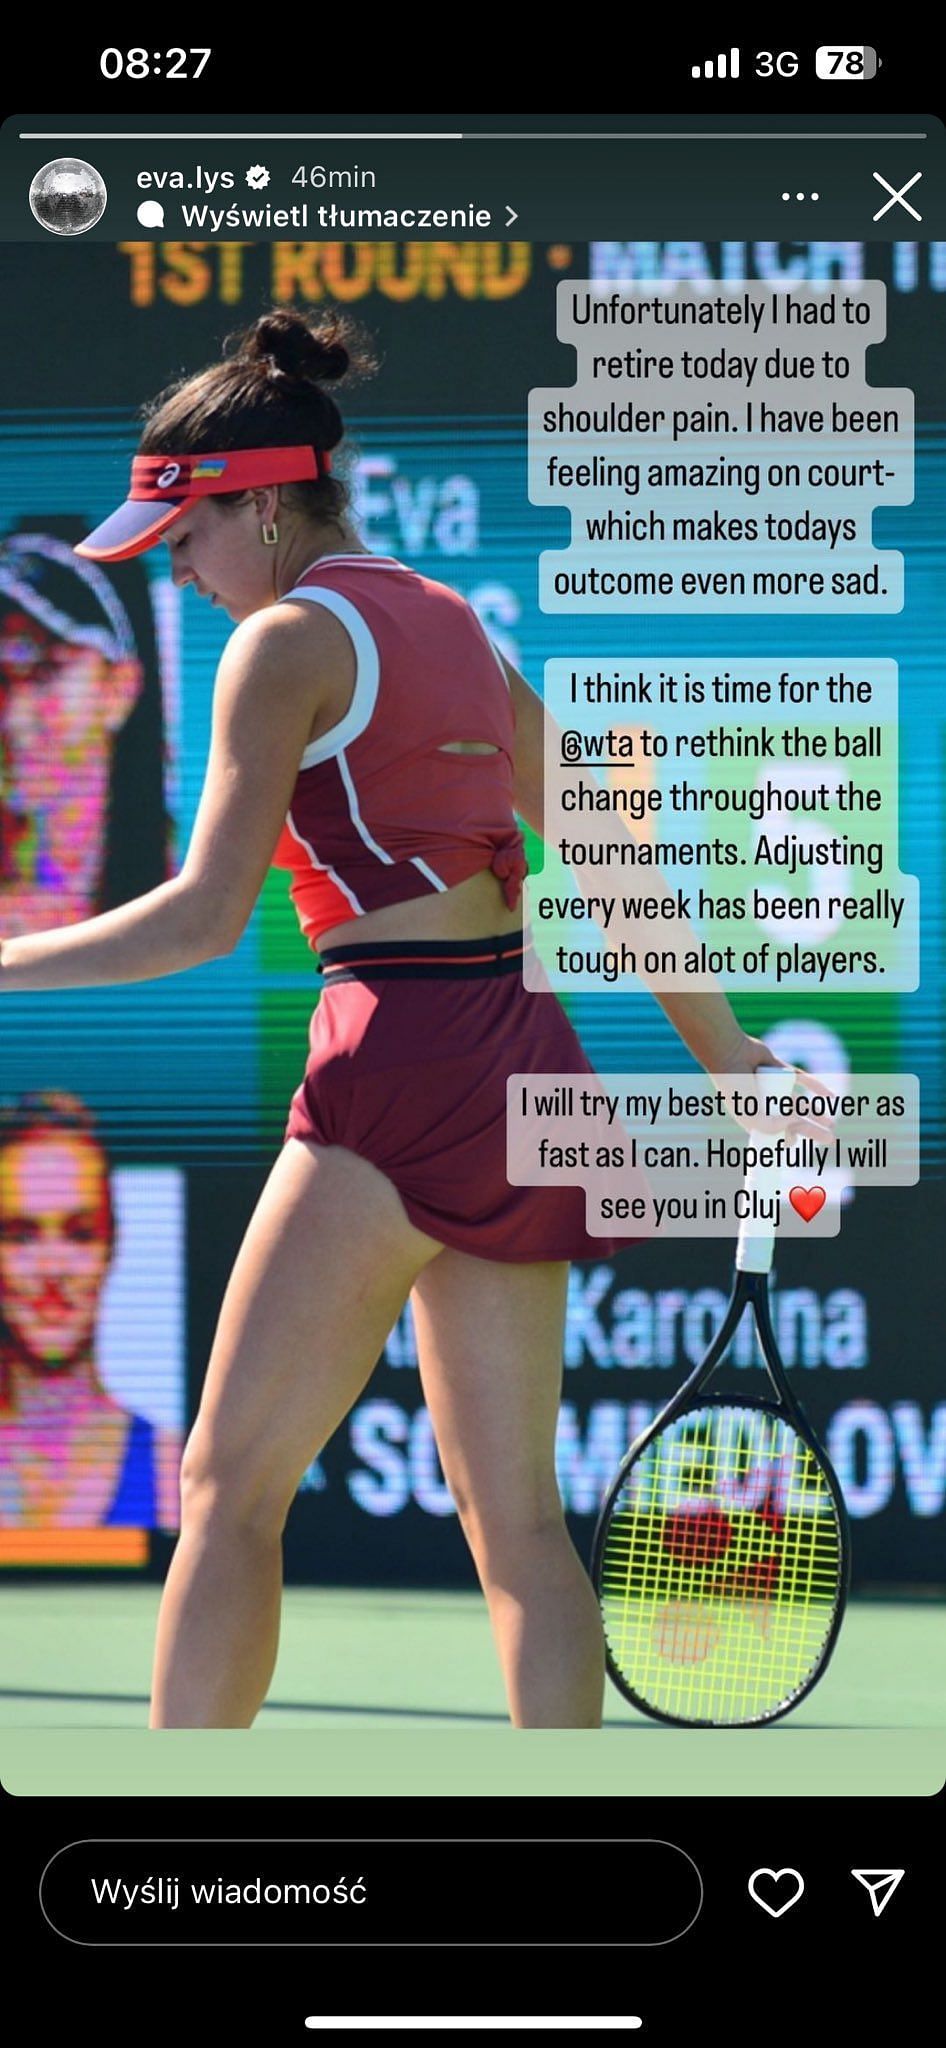 Eva Lys reflects on her second round match at the Korea Open